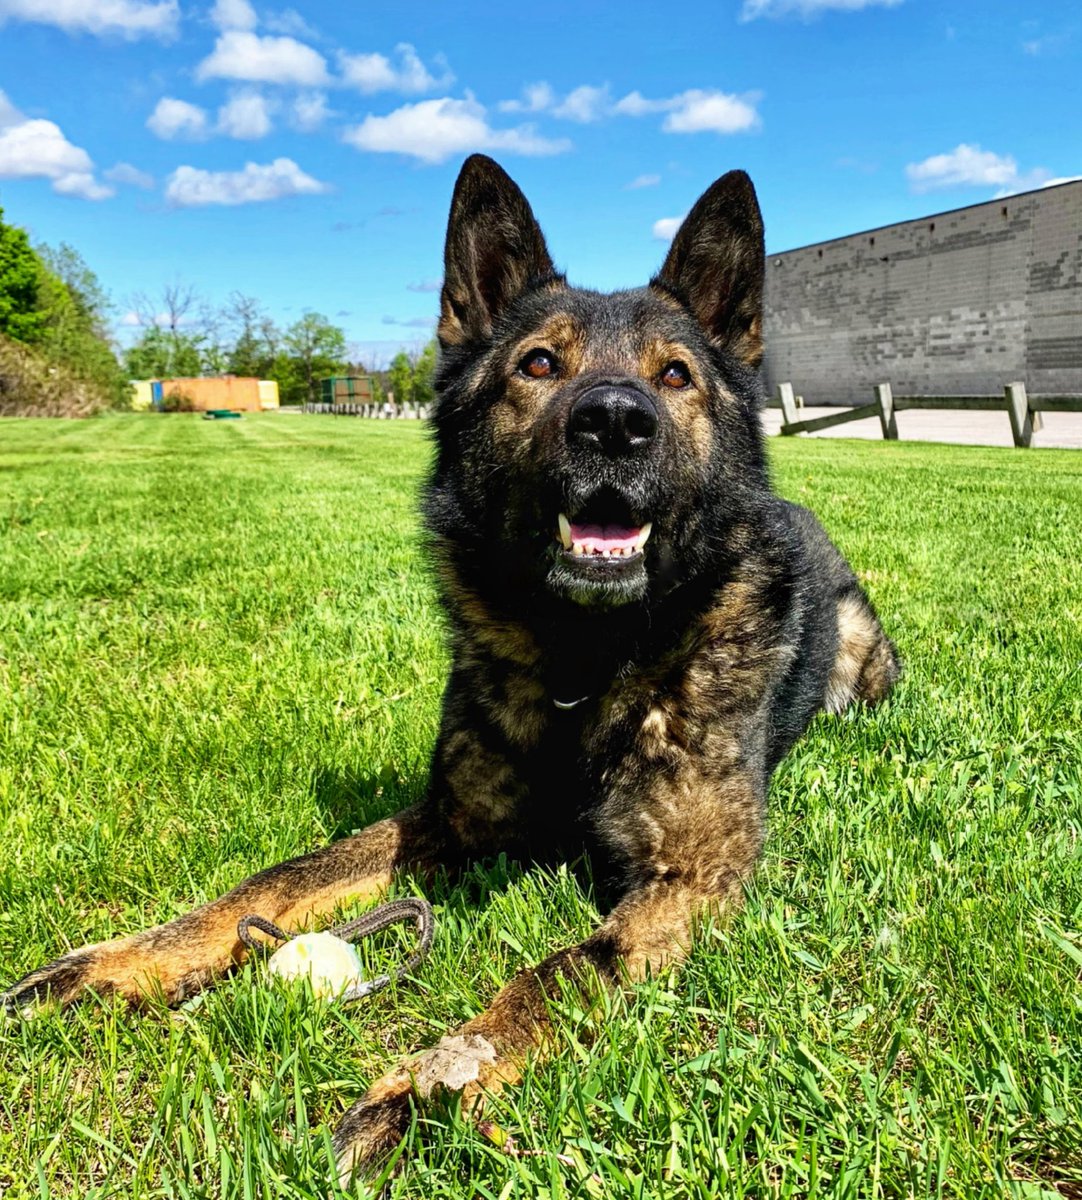 Good morning @townofinnisfil @TownofBWG! With another summer-like day ahead, PSD Nitro has a reminder to never leave children or pets in a hot vehicle. Stay cool and have a safe Saturday! #NoHotKids
#NoHotPets #NoExcuse #K9 #K9Unit